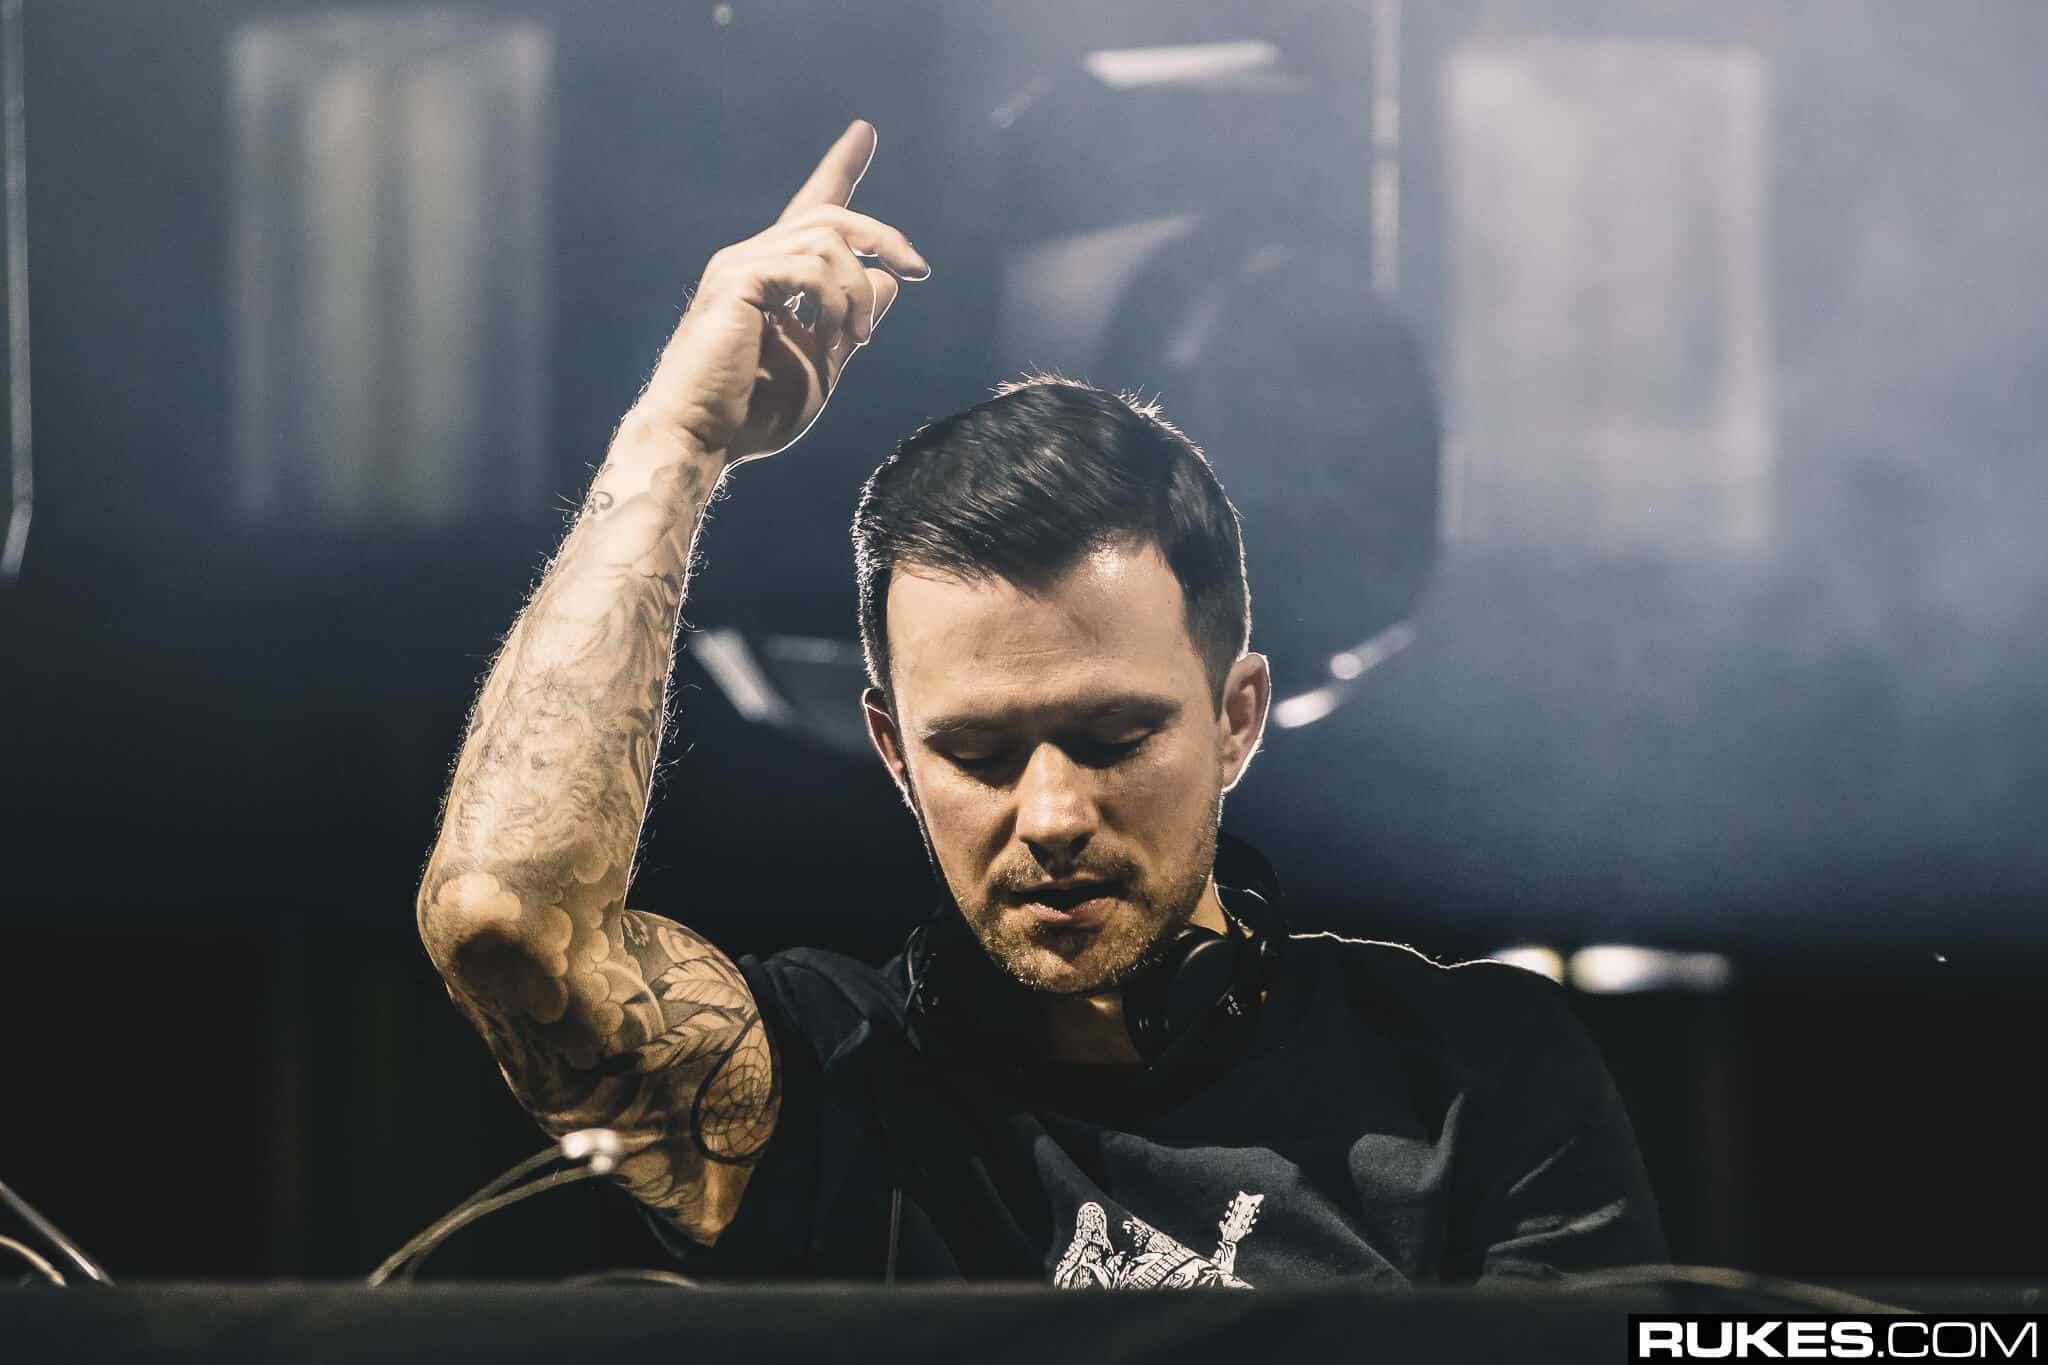 Dirty South drops sublime remix of Lane 8’s anthemic ‘Road’: Listen